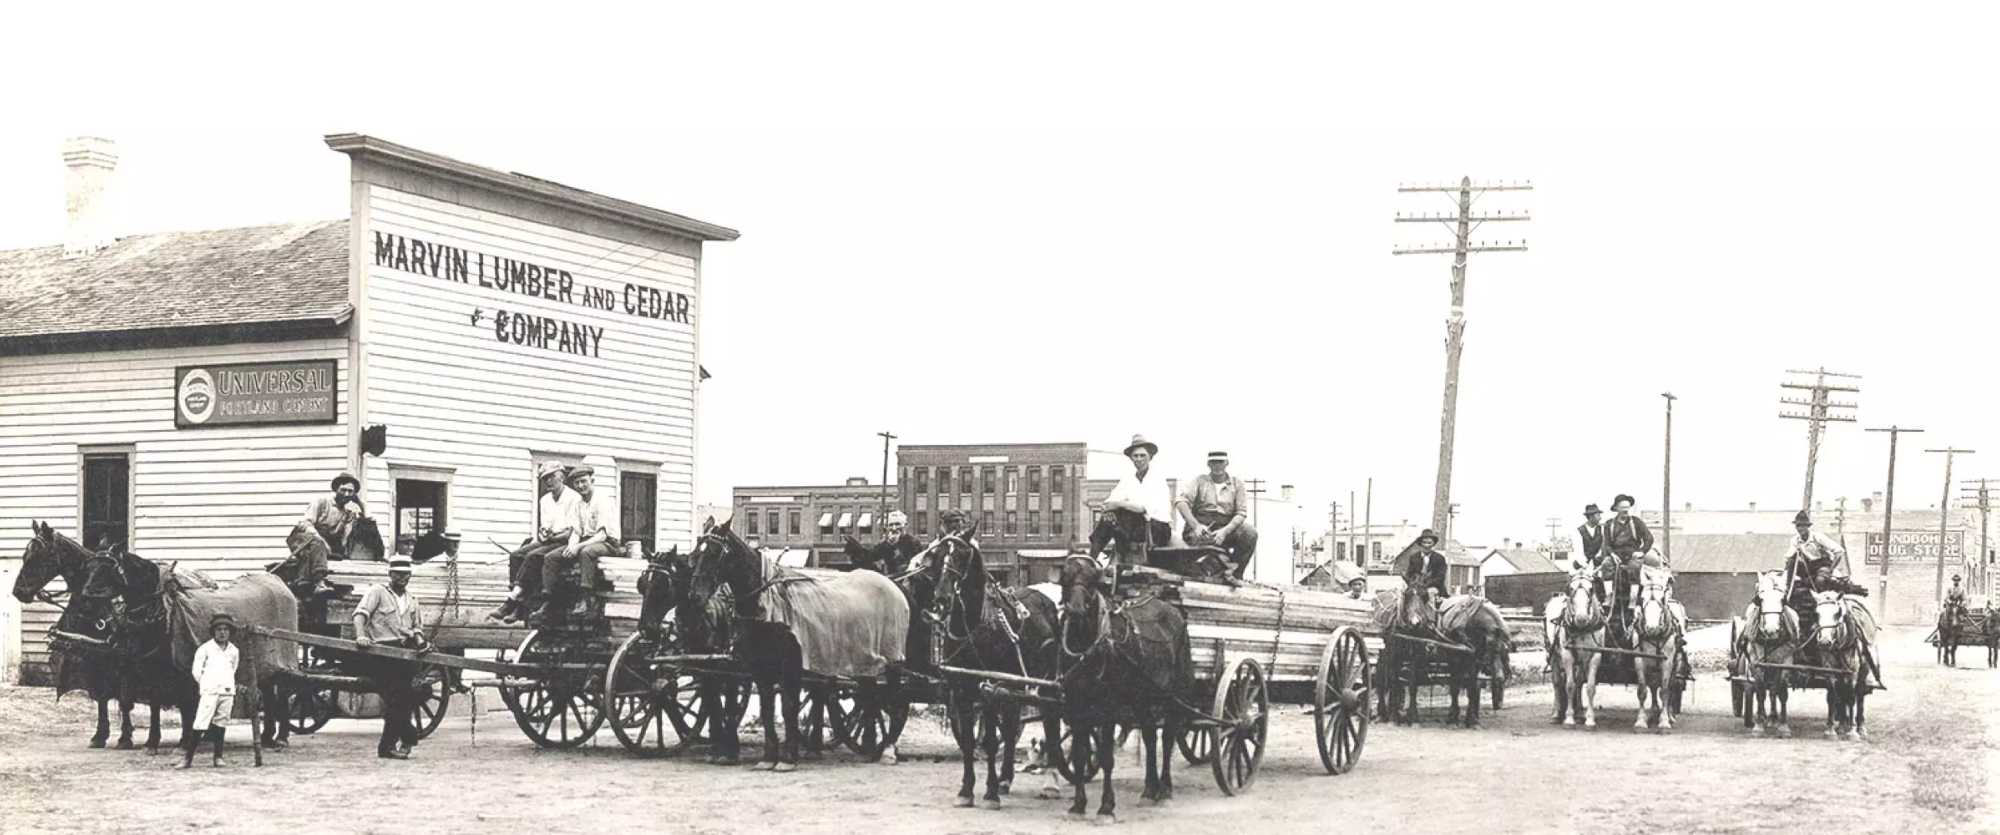 A historical black and white photo showing the original Marvin Lumber & Cedar Company in Warroad.